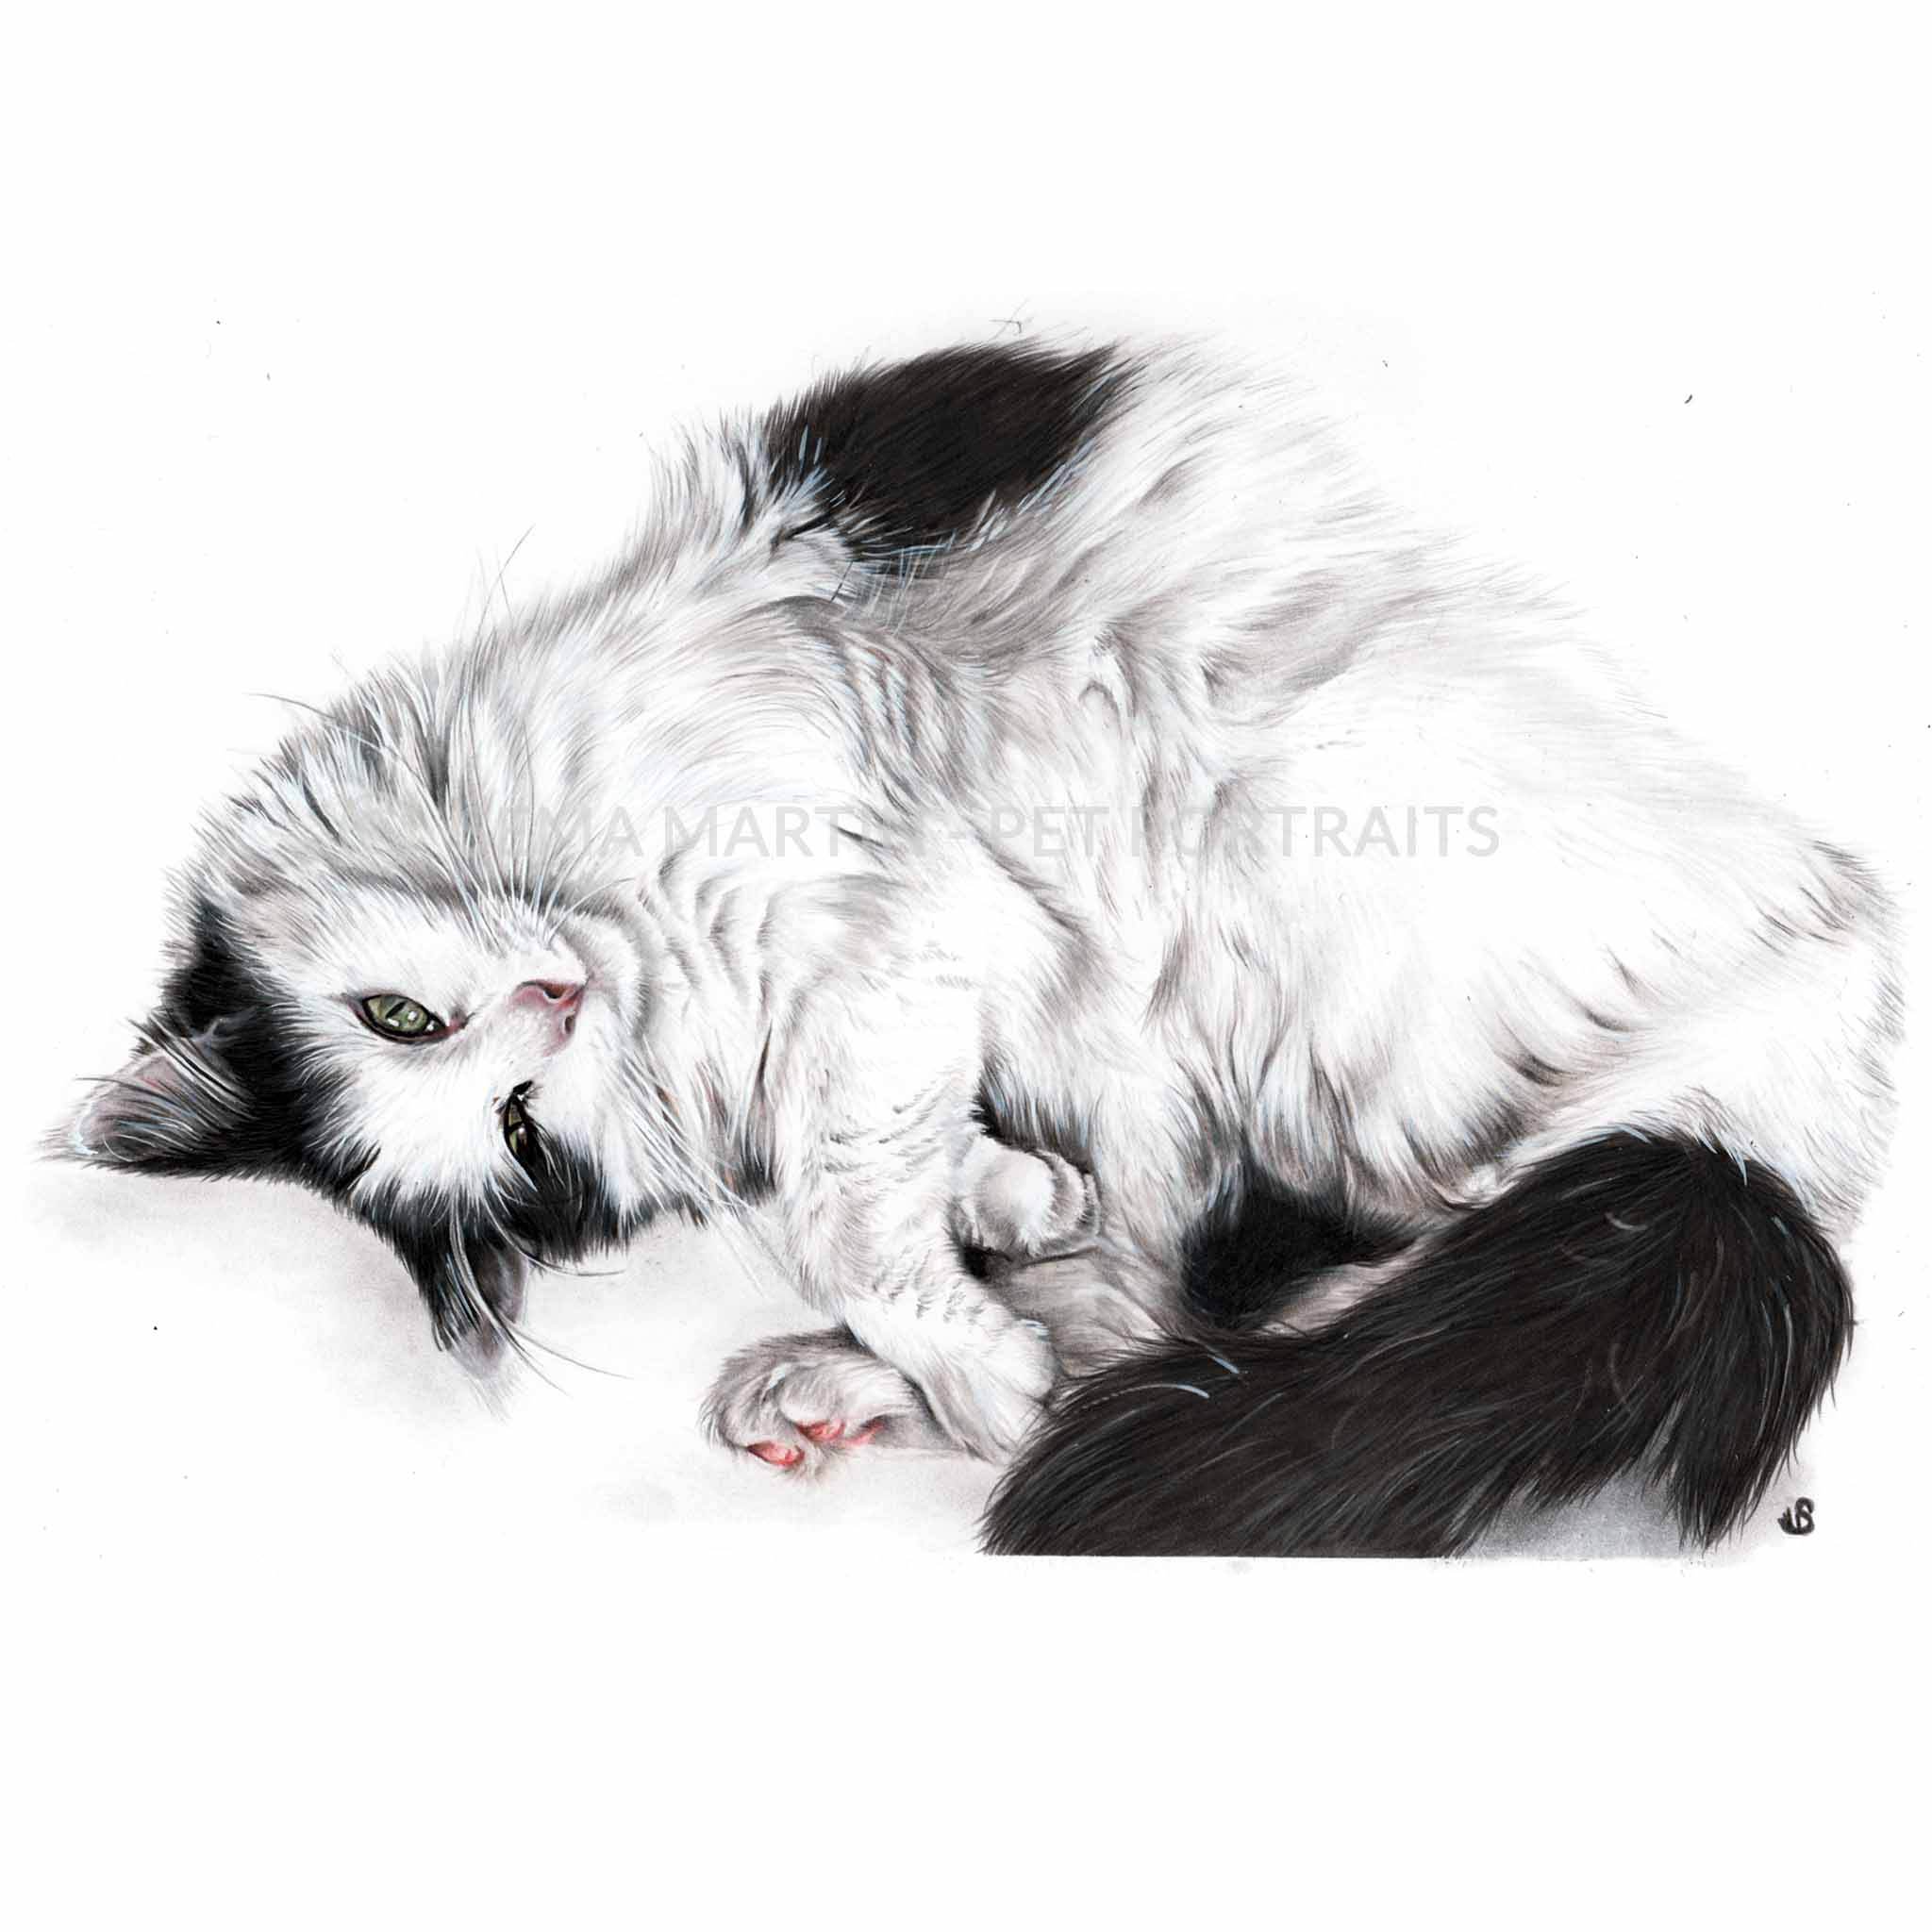 Drawing of Mr Wiggles the black and white cat from New Zealand (Copy)